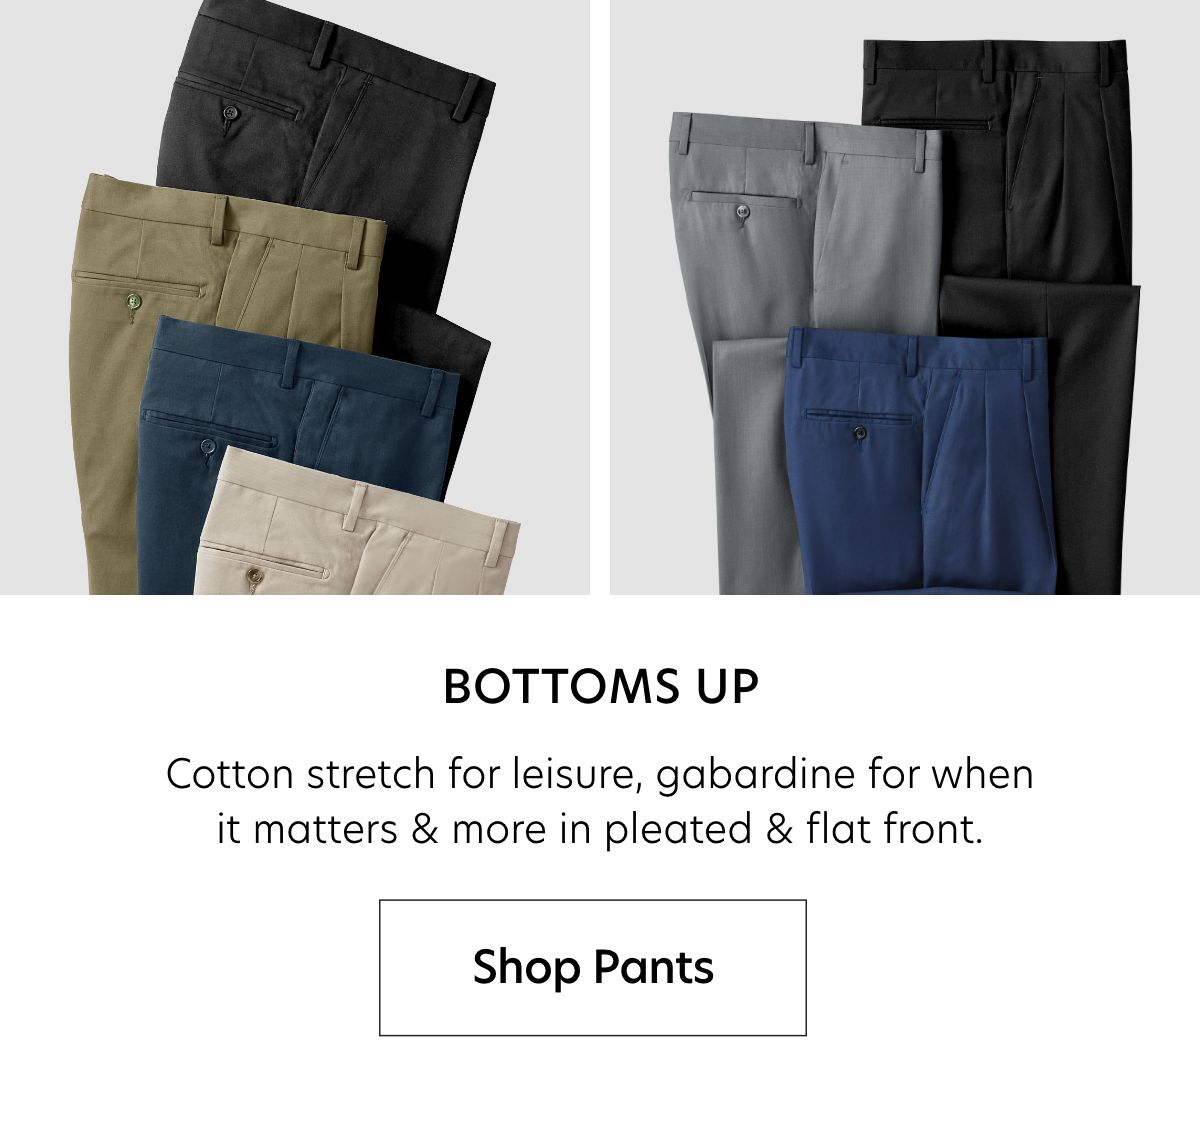  BOTTOMS UP Cotton stretch for leisure, gabardine for when it matters more in pleated flat front. Shop Pants 